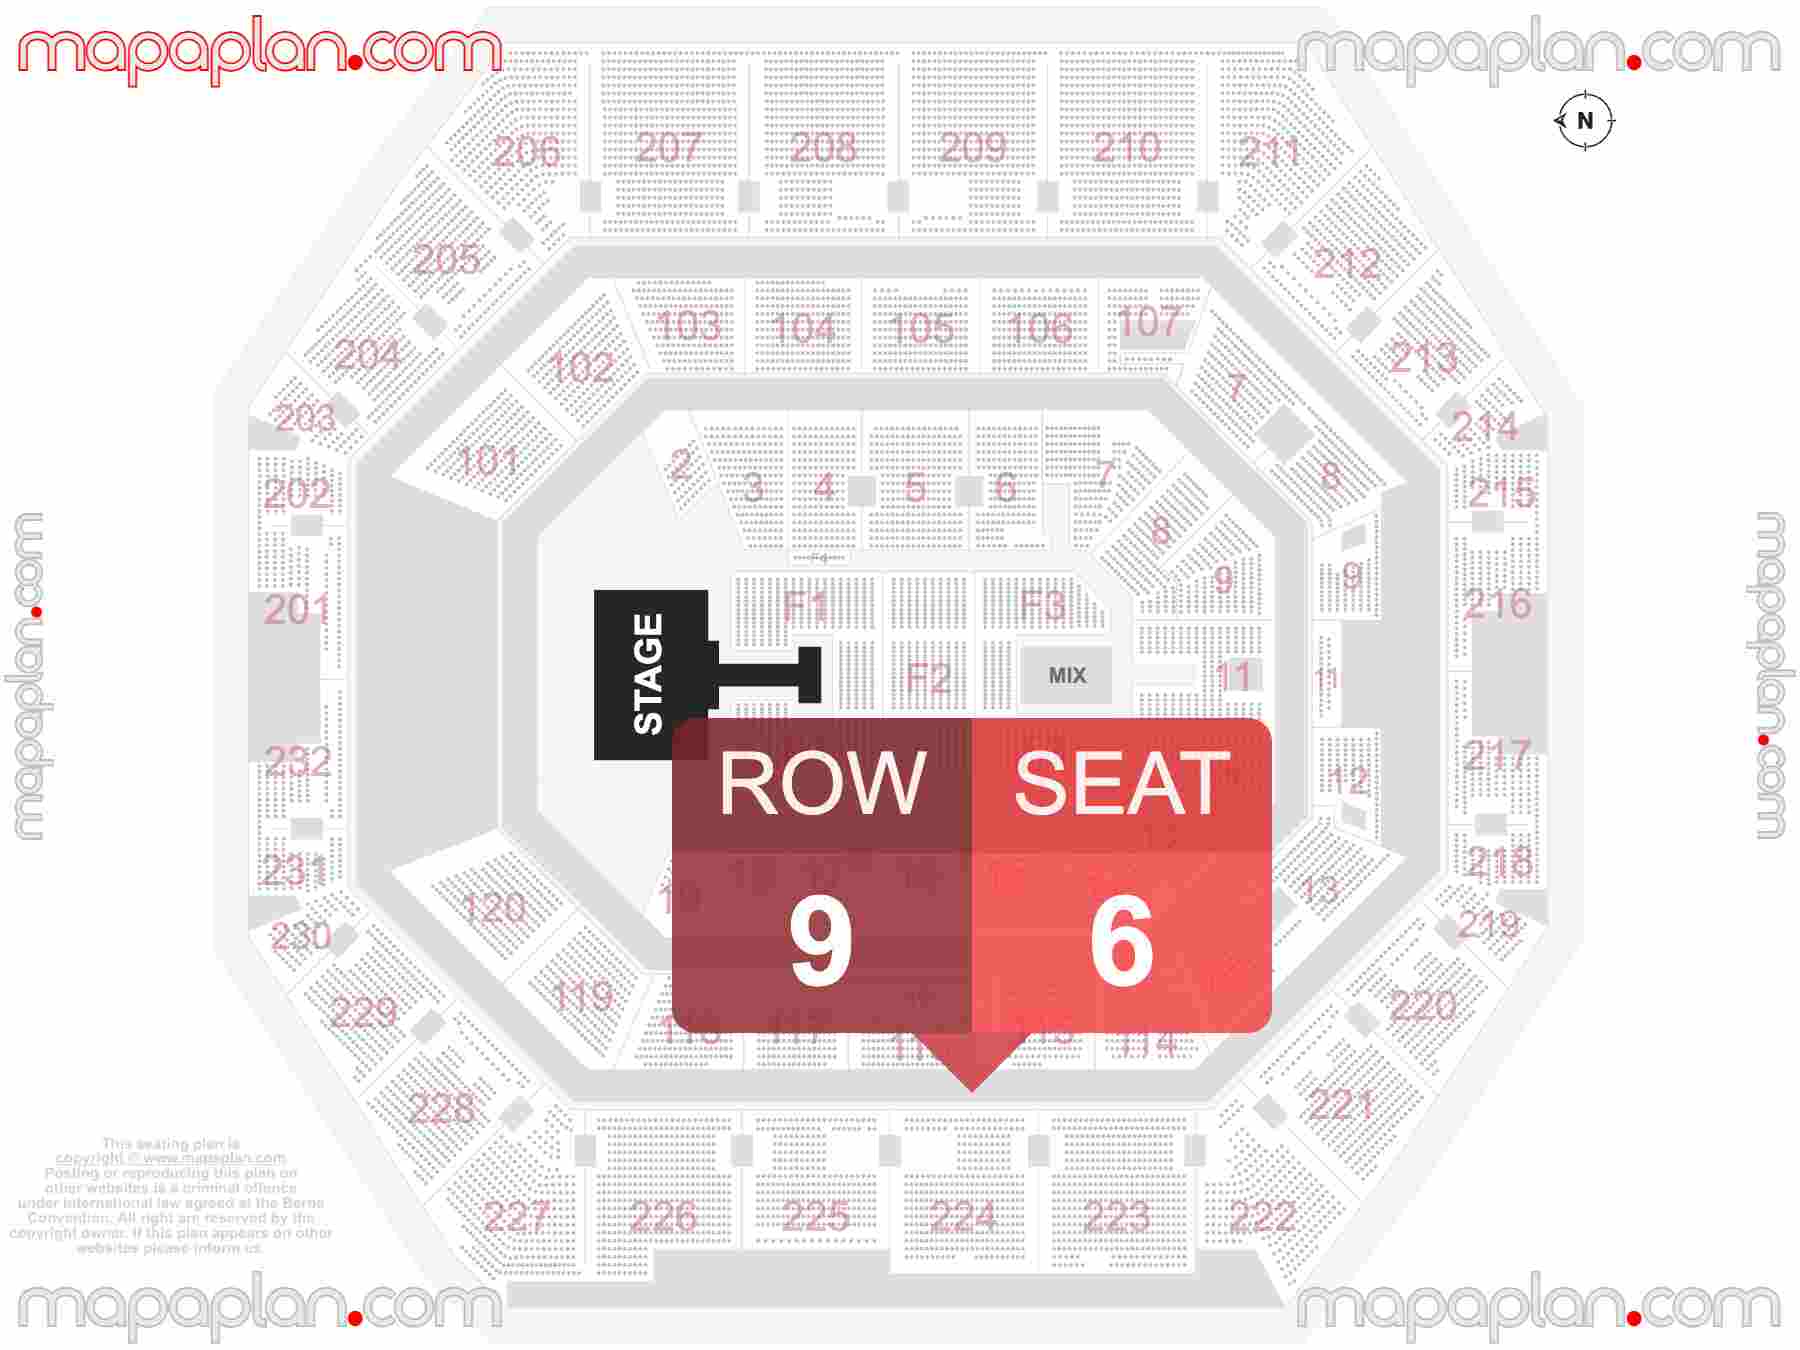 Indianapolis Gainbridge Fieldhouse seating chart Catwalk extended runway concert B-stage seating chart with exact section numbers showing best rows and seats selection 3d layout - Best interactive seat finder tool with precise detailed location data